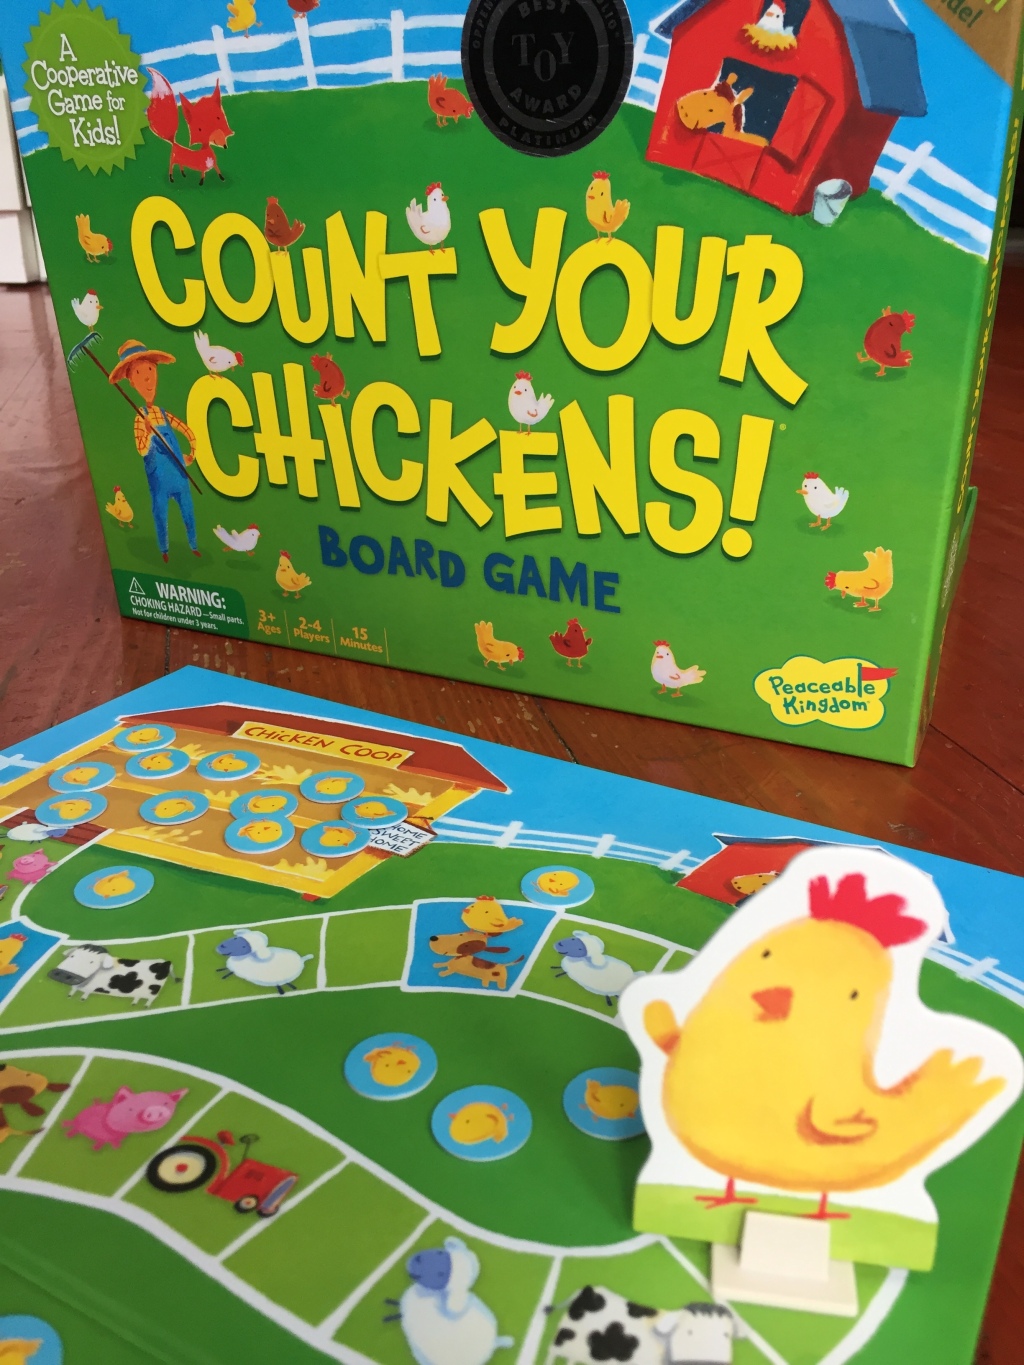 Count Your Chickens mother hen on board in front of box cooperative board game for young kids by Peaceable Kingdom